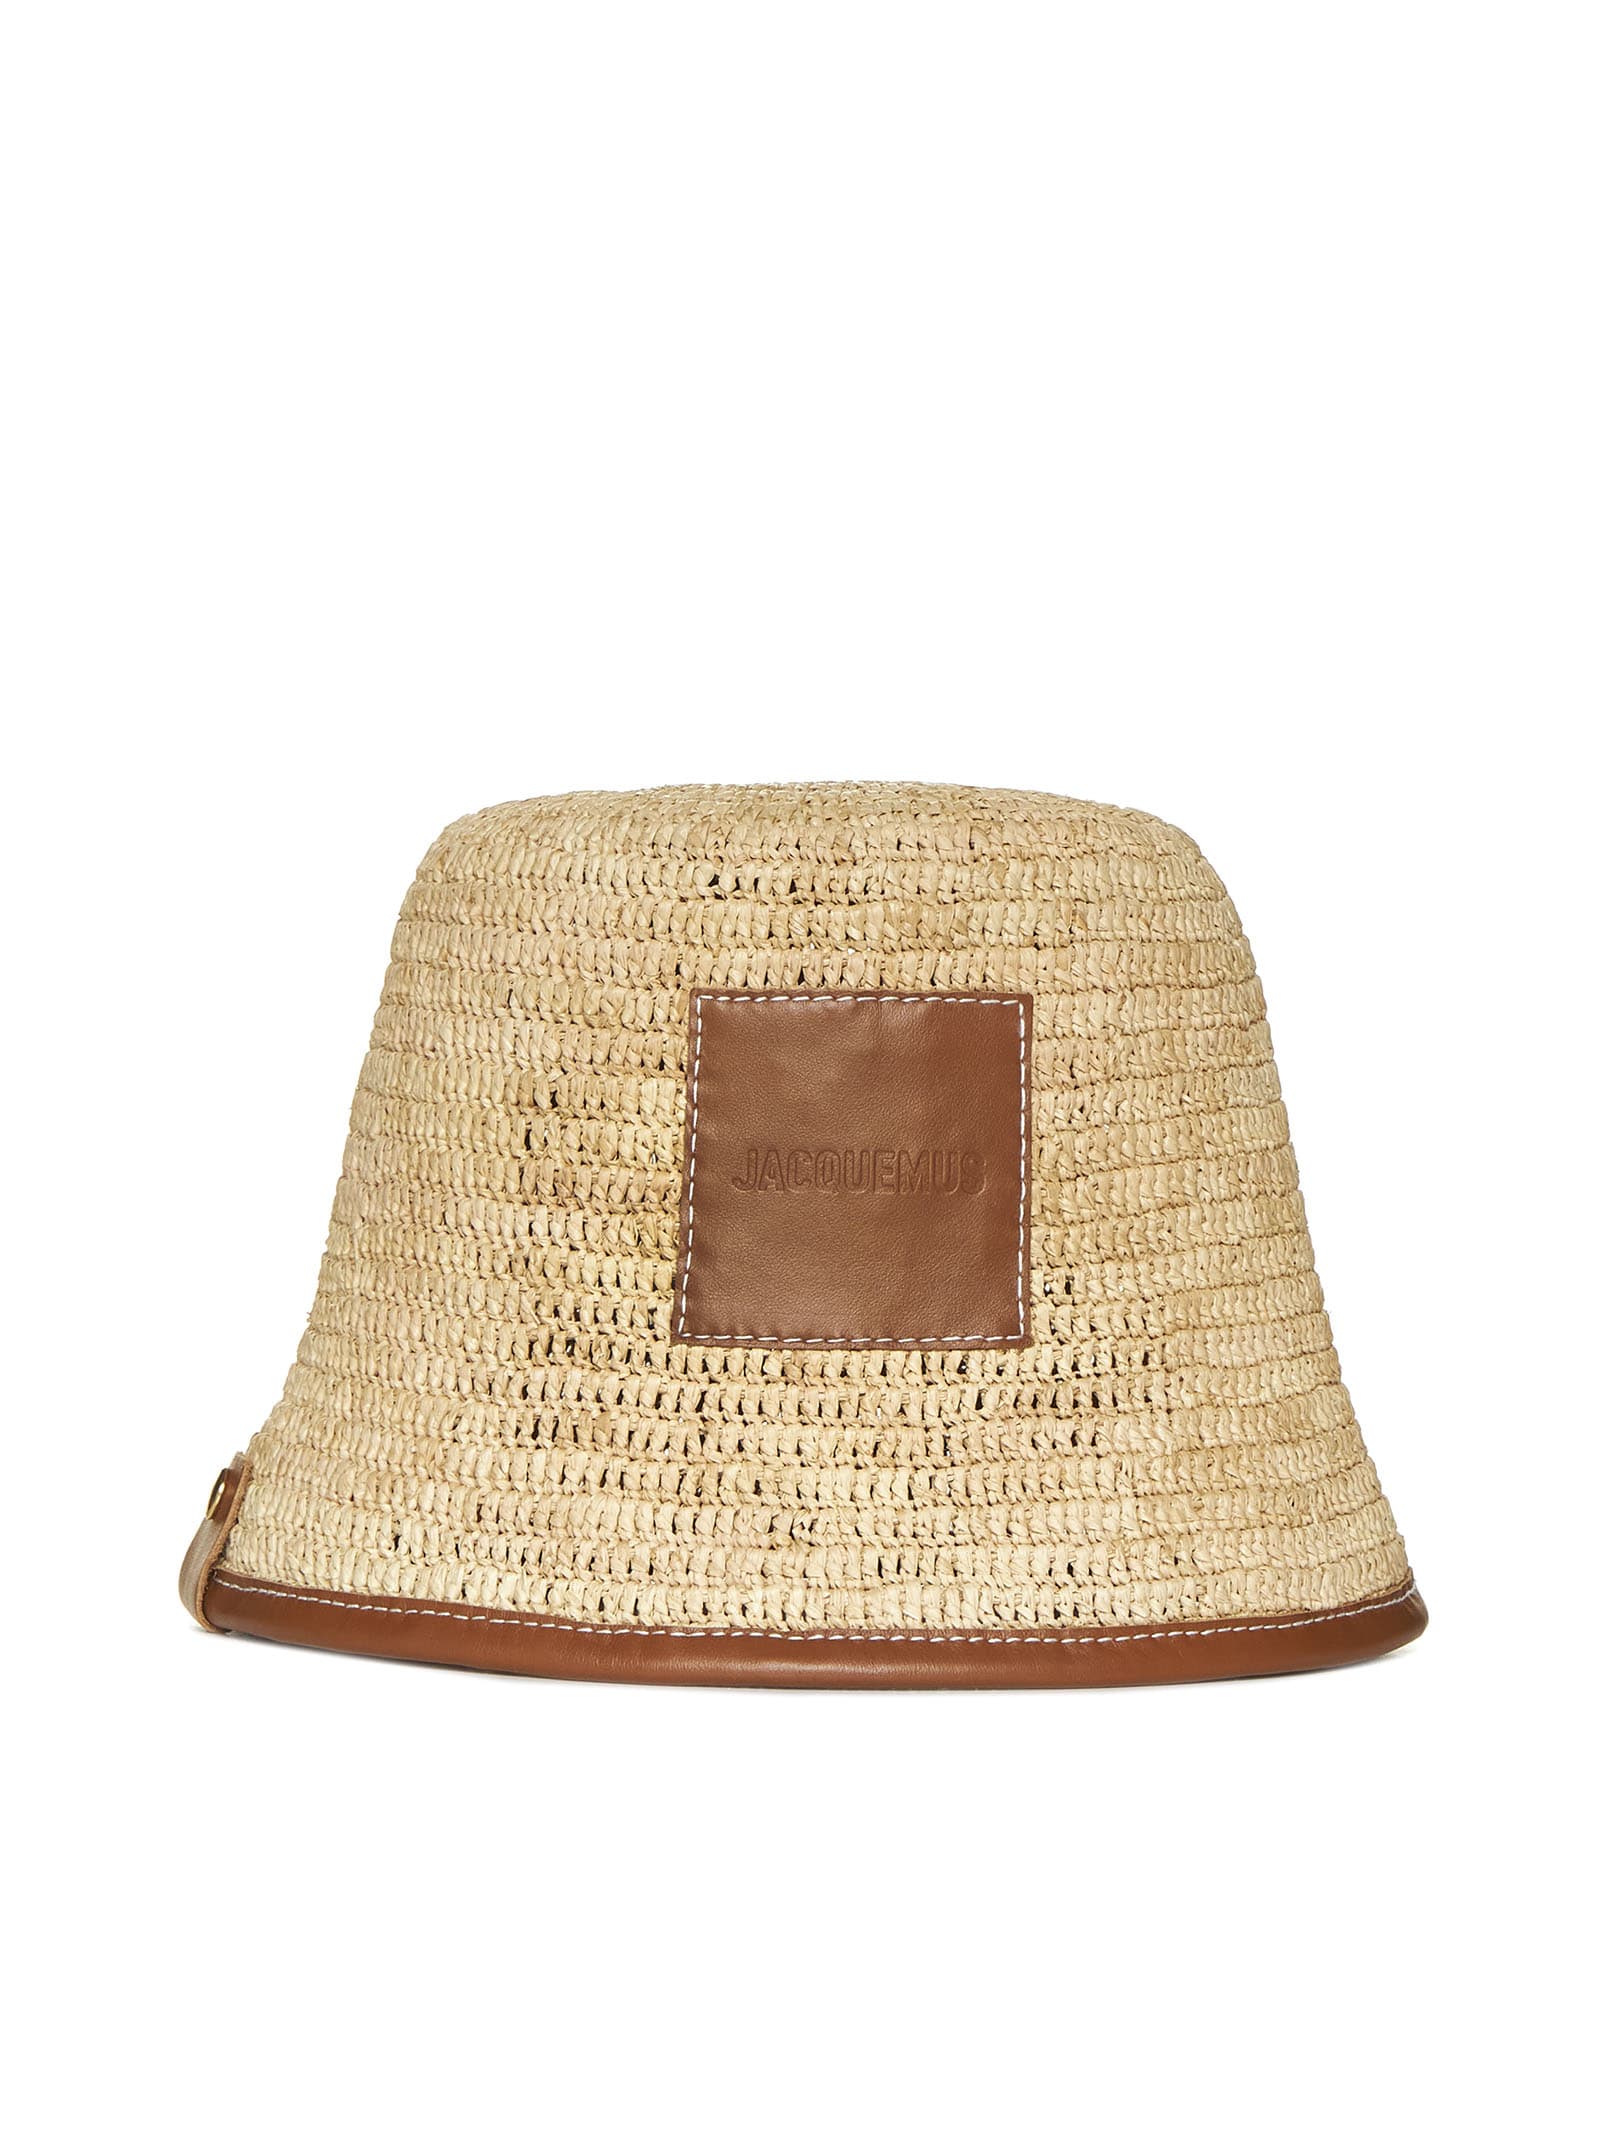 Jacquemus Hat In Light Brown 2